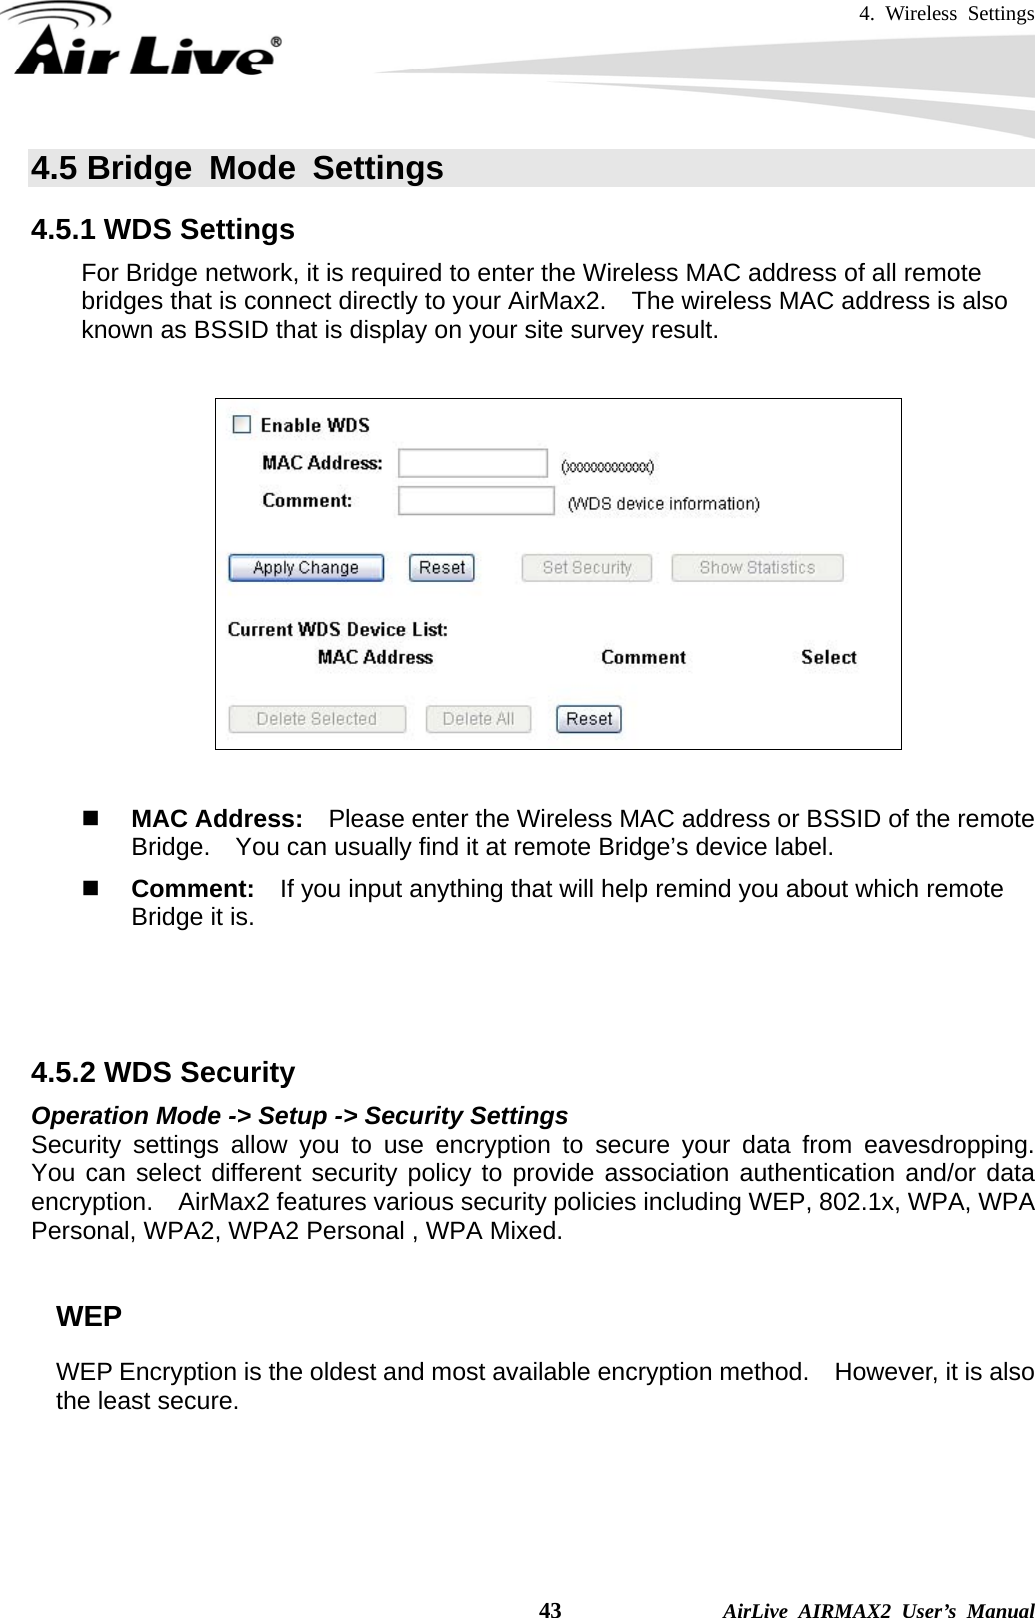 4. Wireless Settings    43              AirLive AIRMAX2 User’s Manual 4.5 Bridge Mode Settings 4.5.1 WDS Settings For Bridge network, it is required to enter the Wireless MAC address of all remote bridges that is connect directly to your AirMax2.    The wireless MAC address is also known as BSSID that is display on your site survey result.           MAC Address:    Please enter the Wireless MAC address or BSSID of the remote Bridge.    You can usually find it at remote Bridge’s device label.      Comment:  If you input anything that will help remind you about which remote Bridge it is.    4.5.2 WDS Security   Operation Mode -&gt; Setup -&gt; Security Settings Security settings allow you to use encryption to secure your data from eavesdropping.  You can select different security policy to provide association authentication and/or data encryption.  AirMax2 features various security policies including WEP, 802.1x, WPA, WPA Personal, WPA2, WPA2 Personal , WPA Mixed.      WEP WEP Encryption is the oldest and most available encryption method.    However, it is also the least secure.    